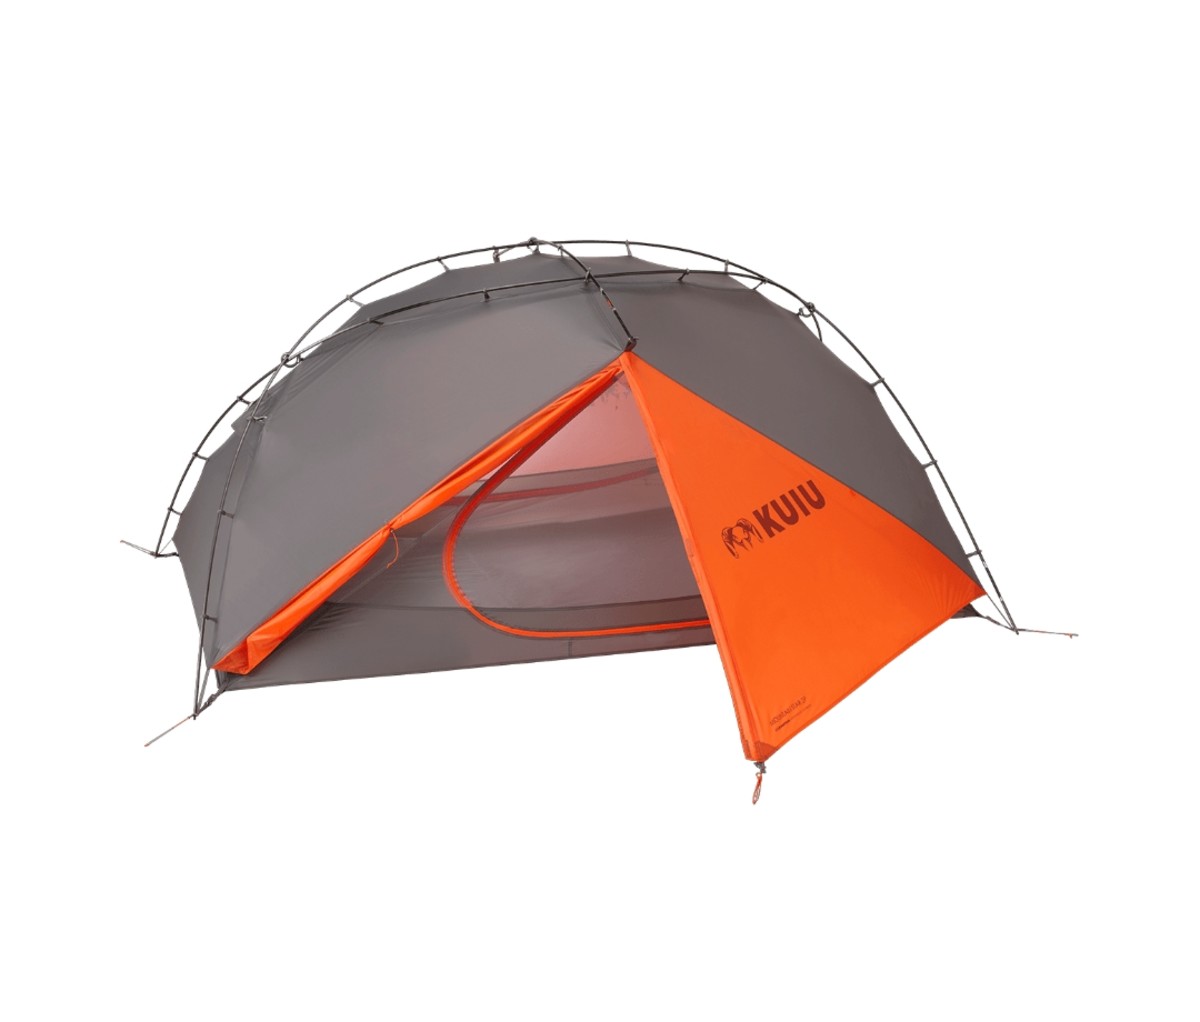 Kuiu Mountain Star Two-Person Tent